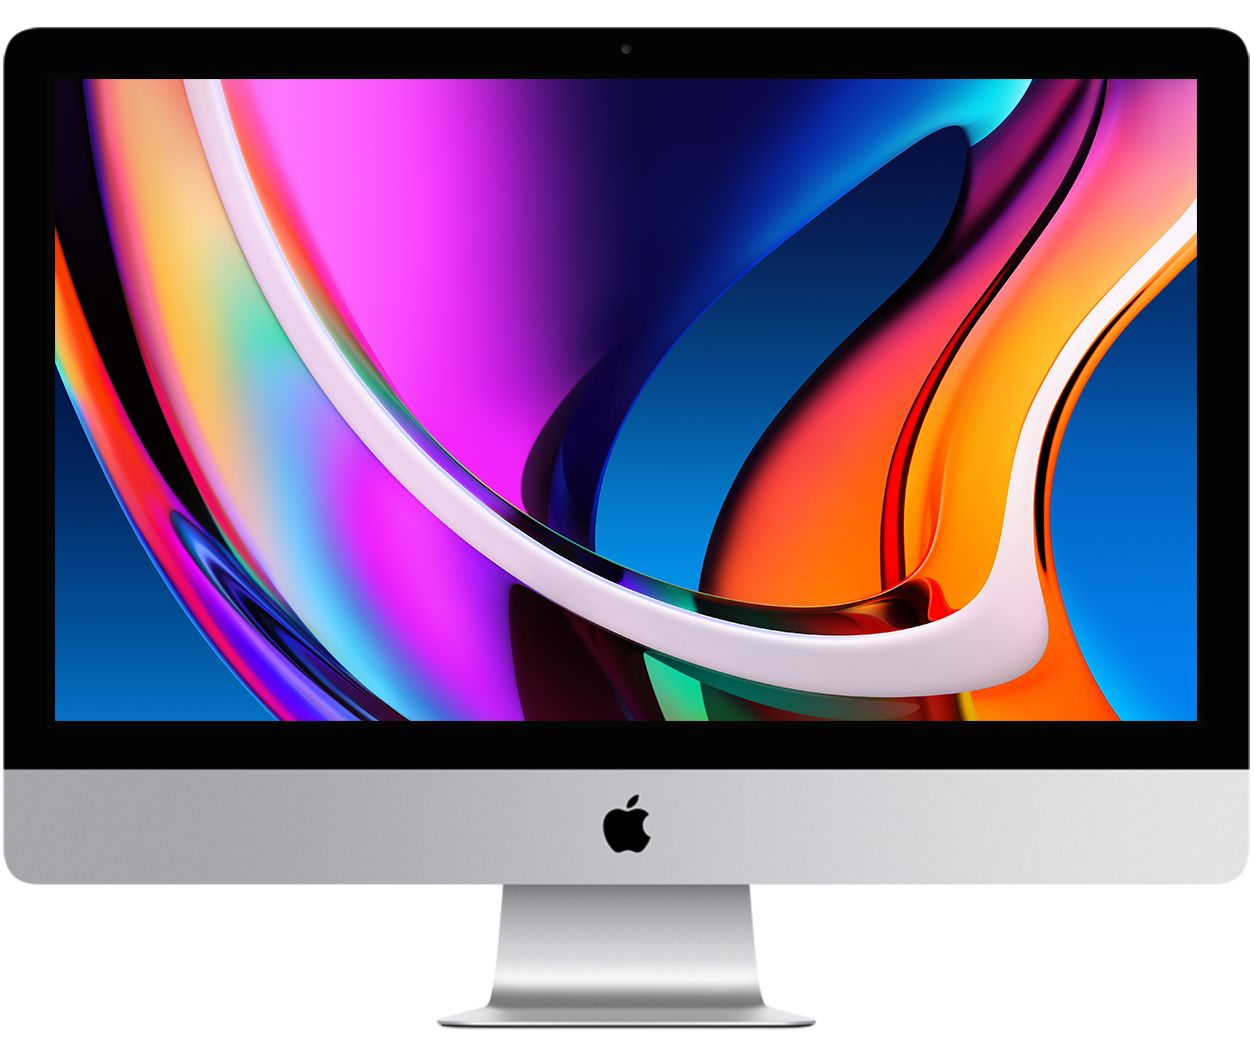 Apple Significantly Enhances the 27-inch iMac